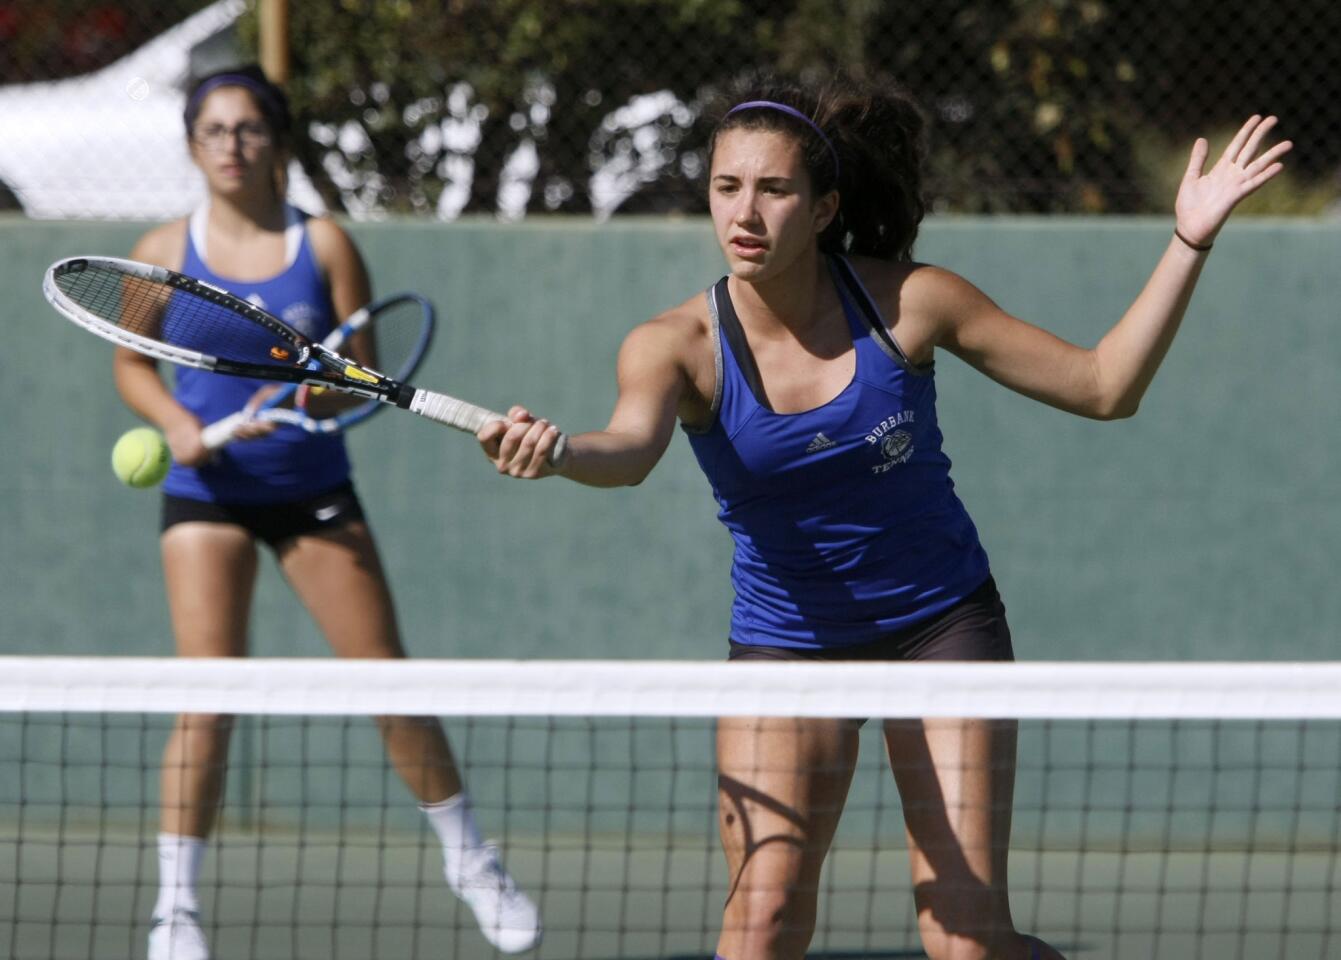 Burbank High School doubles player Elizabeth Sanchez returns one as teammate Meredy Gharabegi looks on in the background during Pacific League tennis playoff game at Pasadena High School in Pasadena on Wednesday, Oct. 30, 2013.